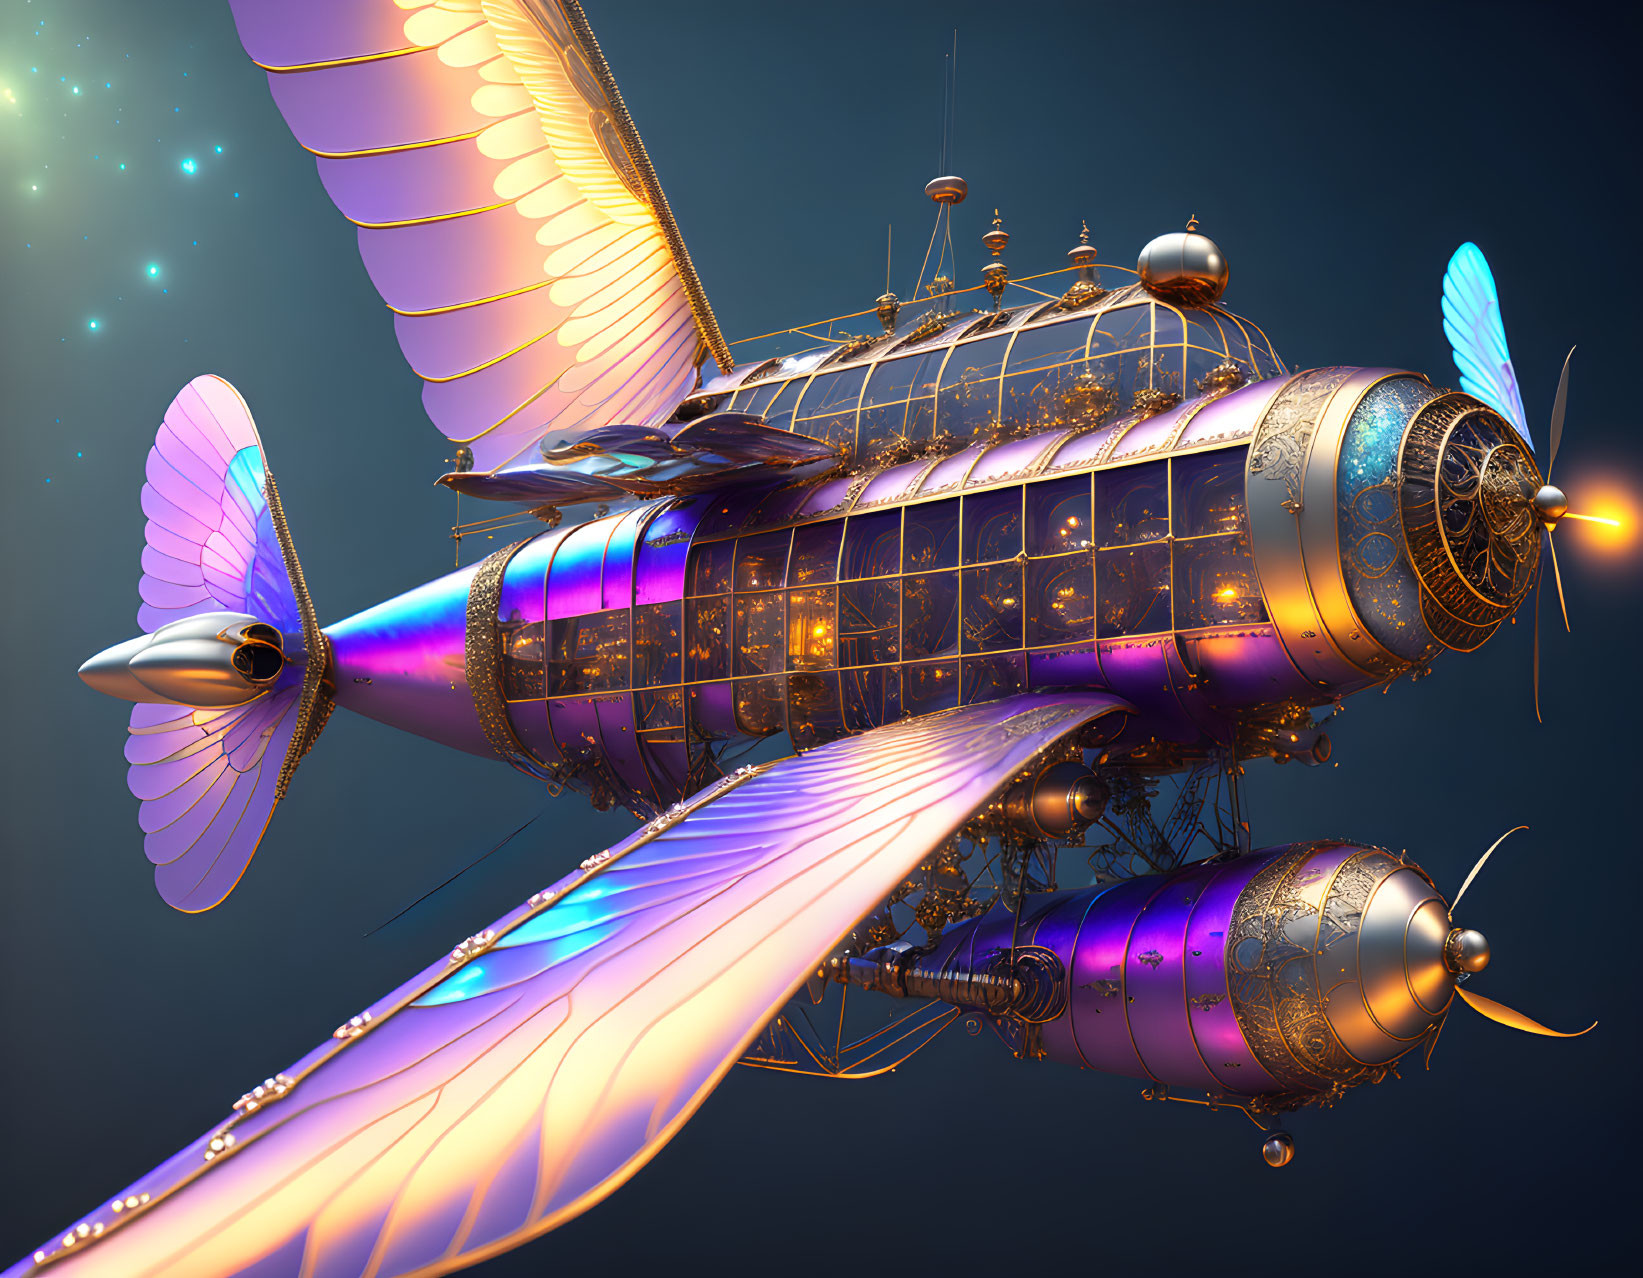 Steampunk airship with mechanical butterfly wings in twilight sky